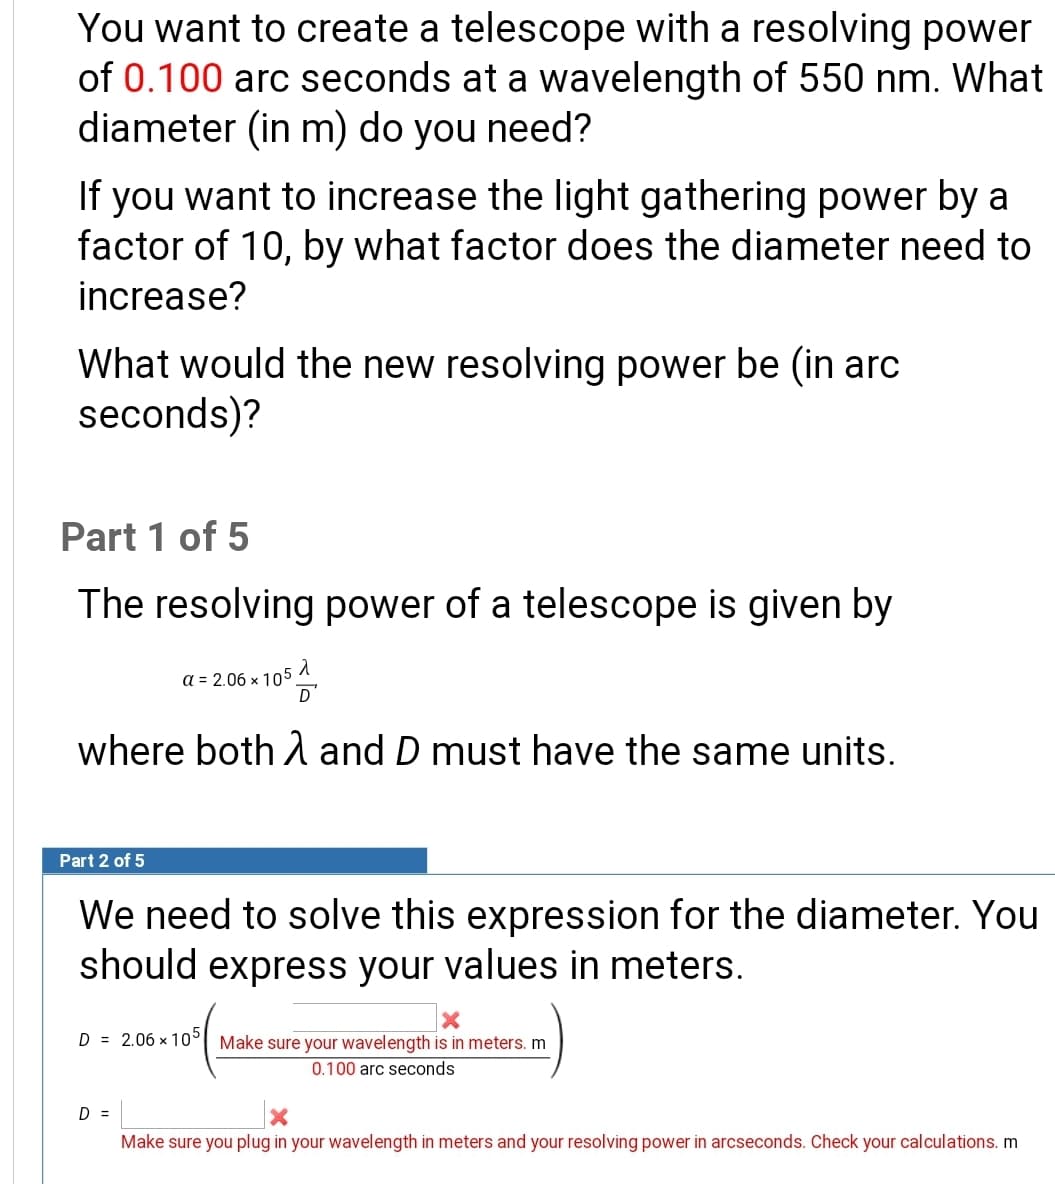 You want to create a telescope with a resolving powe
of 0.100 arc seconds at a wavelength of 550 nm. Wha
diameter (in m) do you need?
If you want to increase the light gathering power by a
factor of 10, by what factor does the diameter need to
increase?
What would the new resolving power be (in arc
seconds)?
